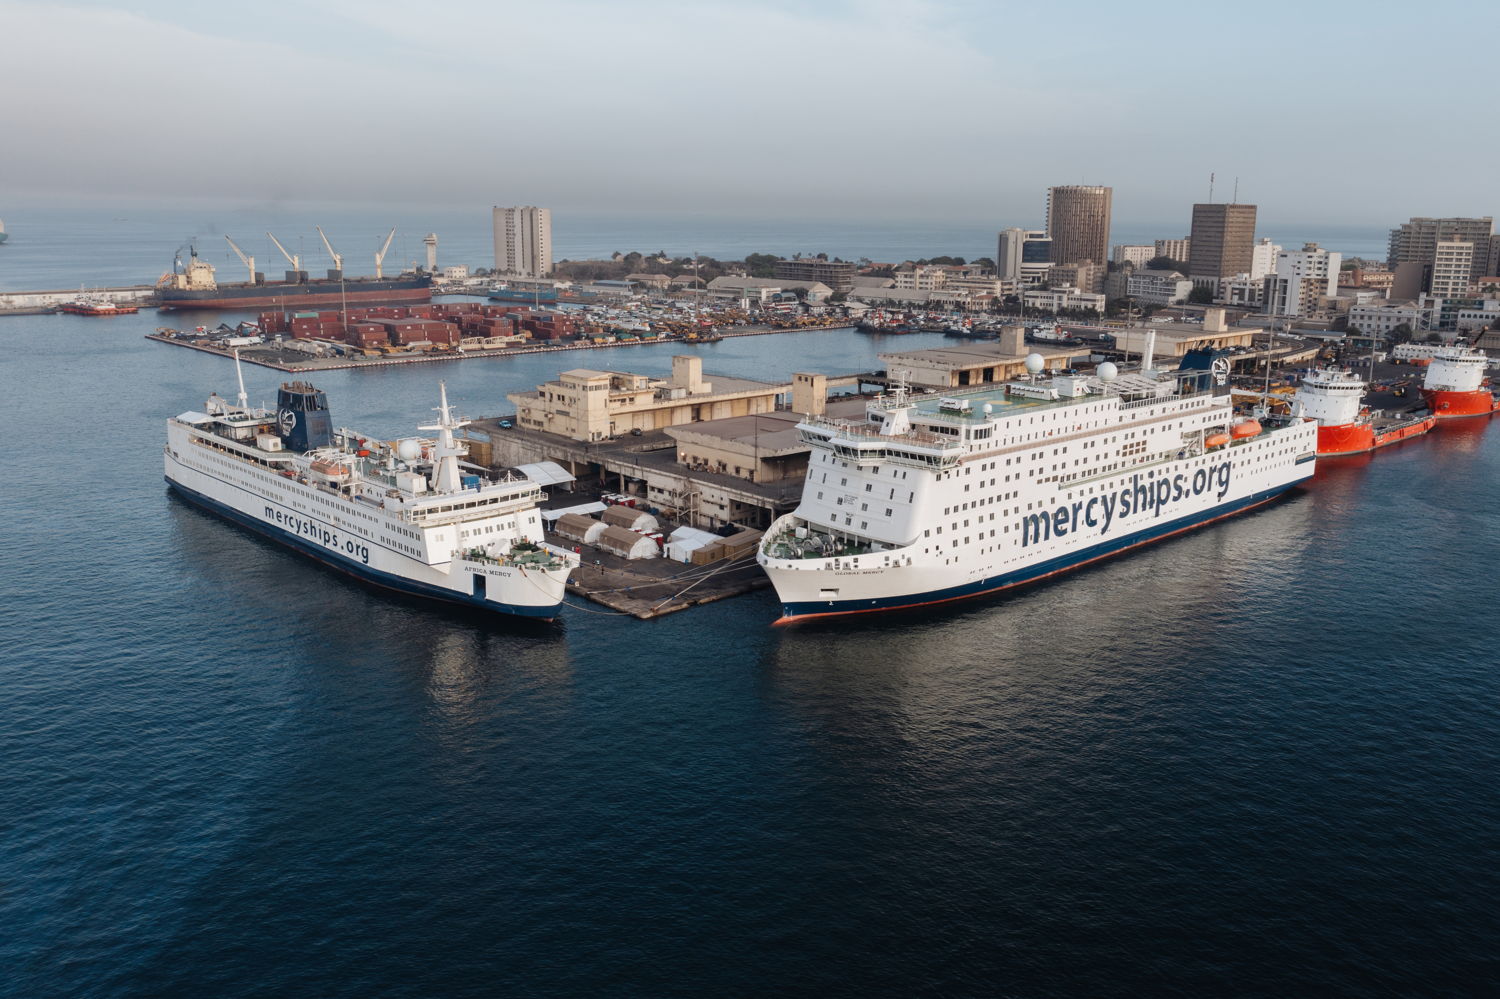 For the first time in Mercy Ships history, the Global Mercy docked next to the Africa Mercy in the Port of Dakar Senegal.